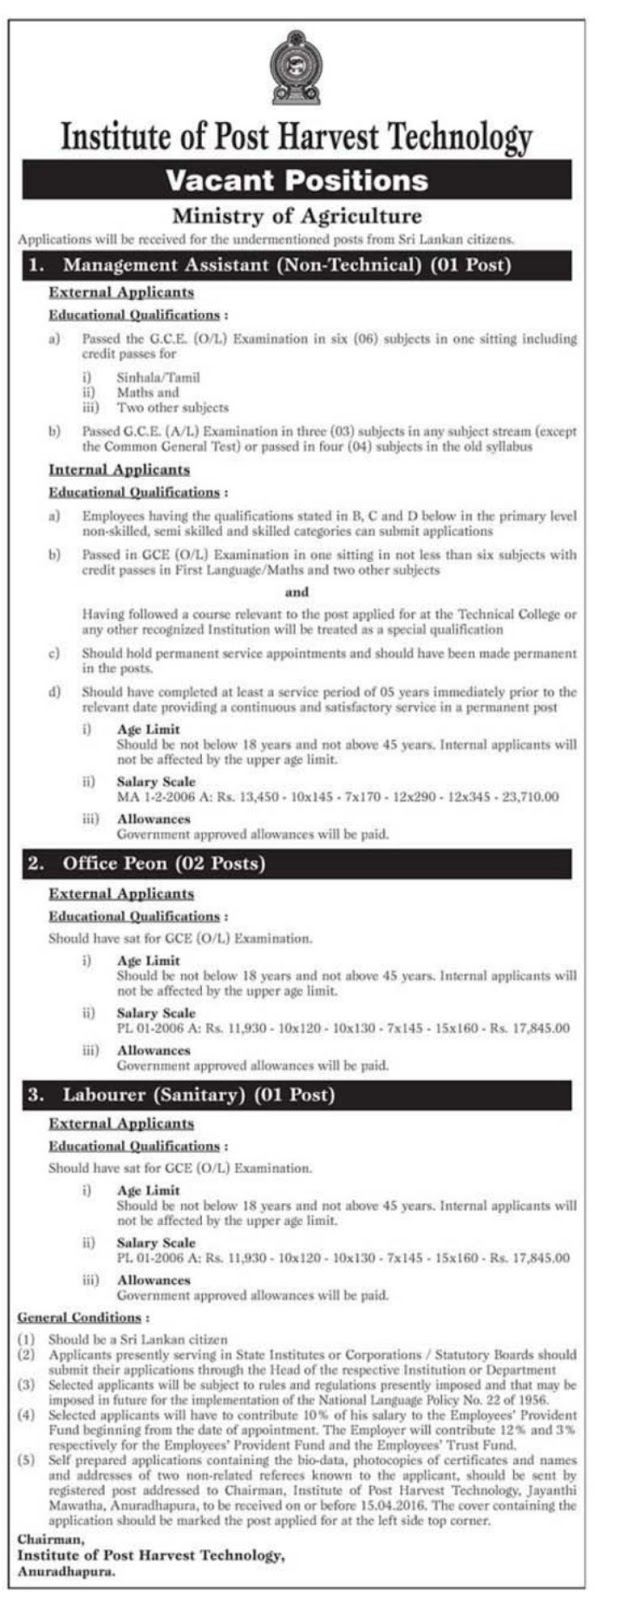 MA / Office Peon / Labourer Vacancies in Institute of Post Harvest Technology